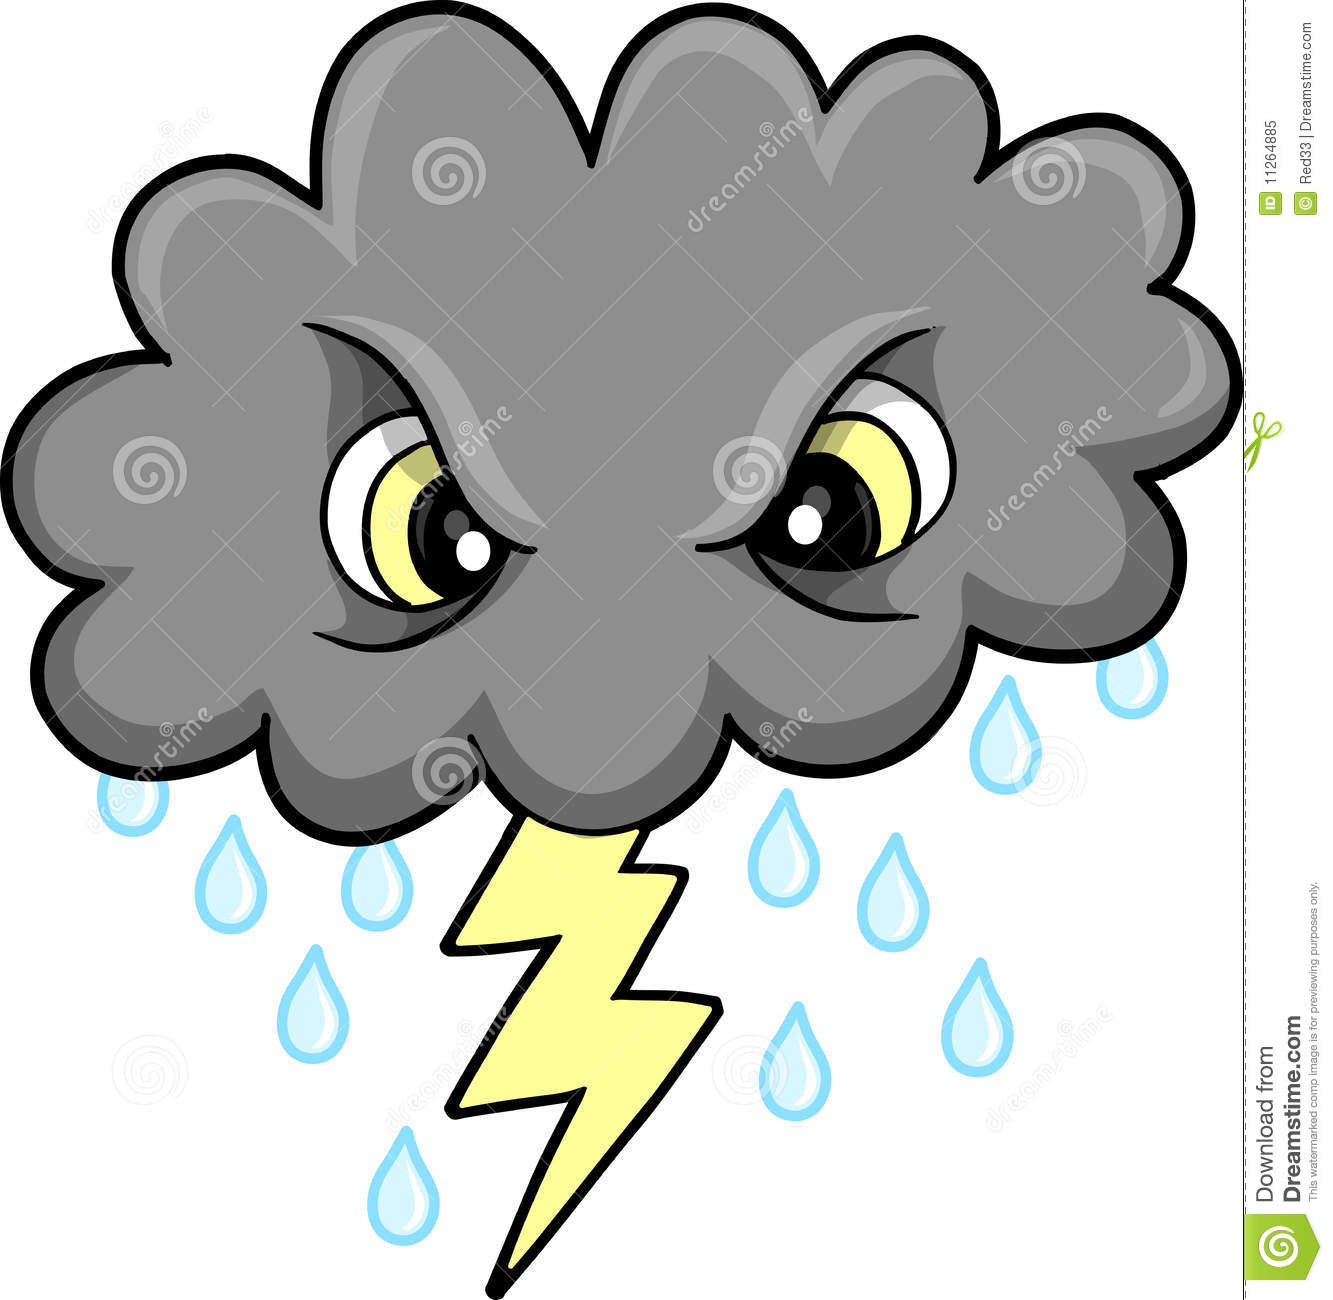 Mean Thunder Cloud Vector Royalty Free Stock Photo   Image  11264885